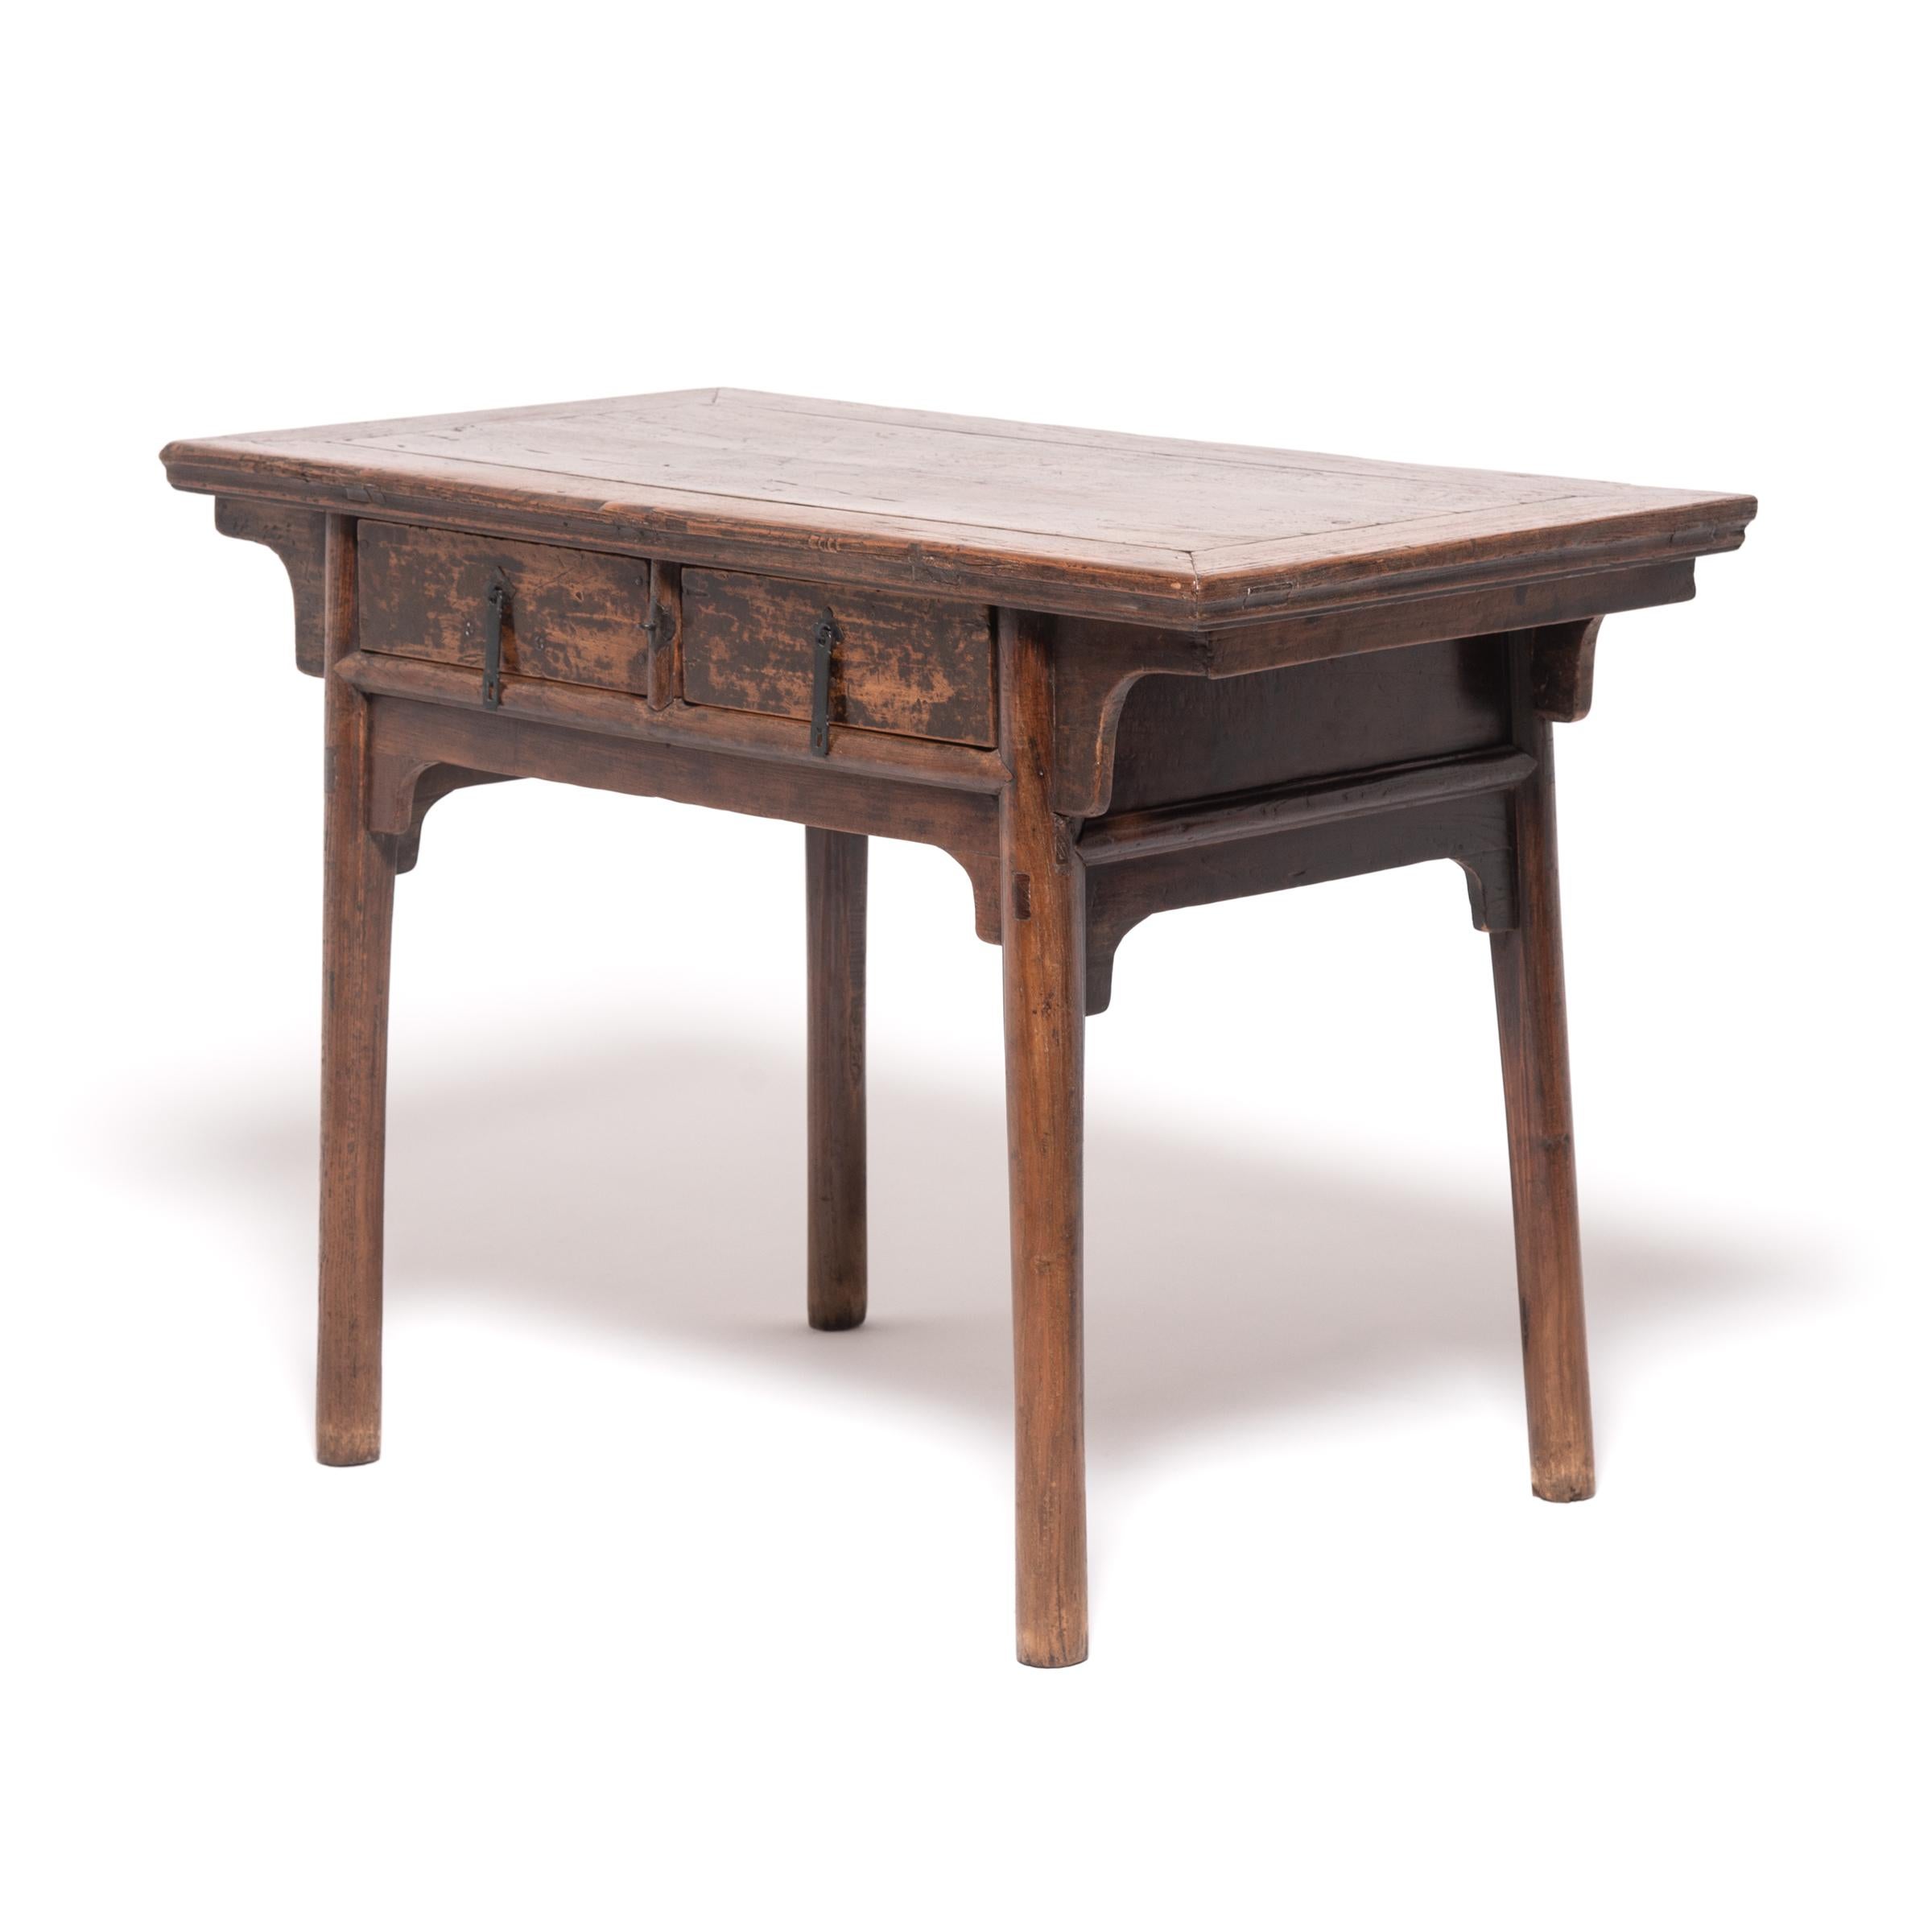 Crafted of northern elmwood in China's Shanxi province, this early 19th-century altar table was once used to display an ancestral shrine in a provincial Confucian household. Incense, candles, and fruits would have covered the narrow table as